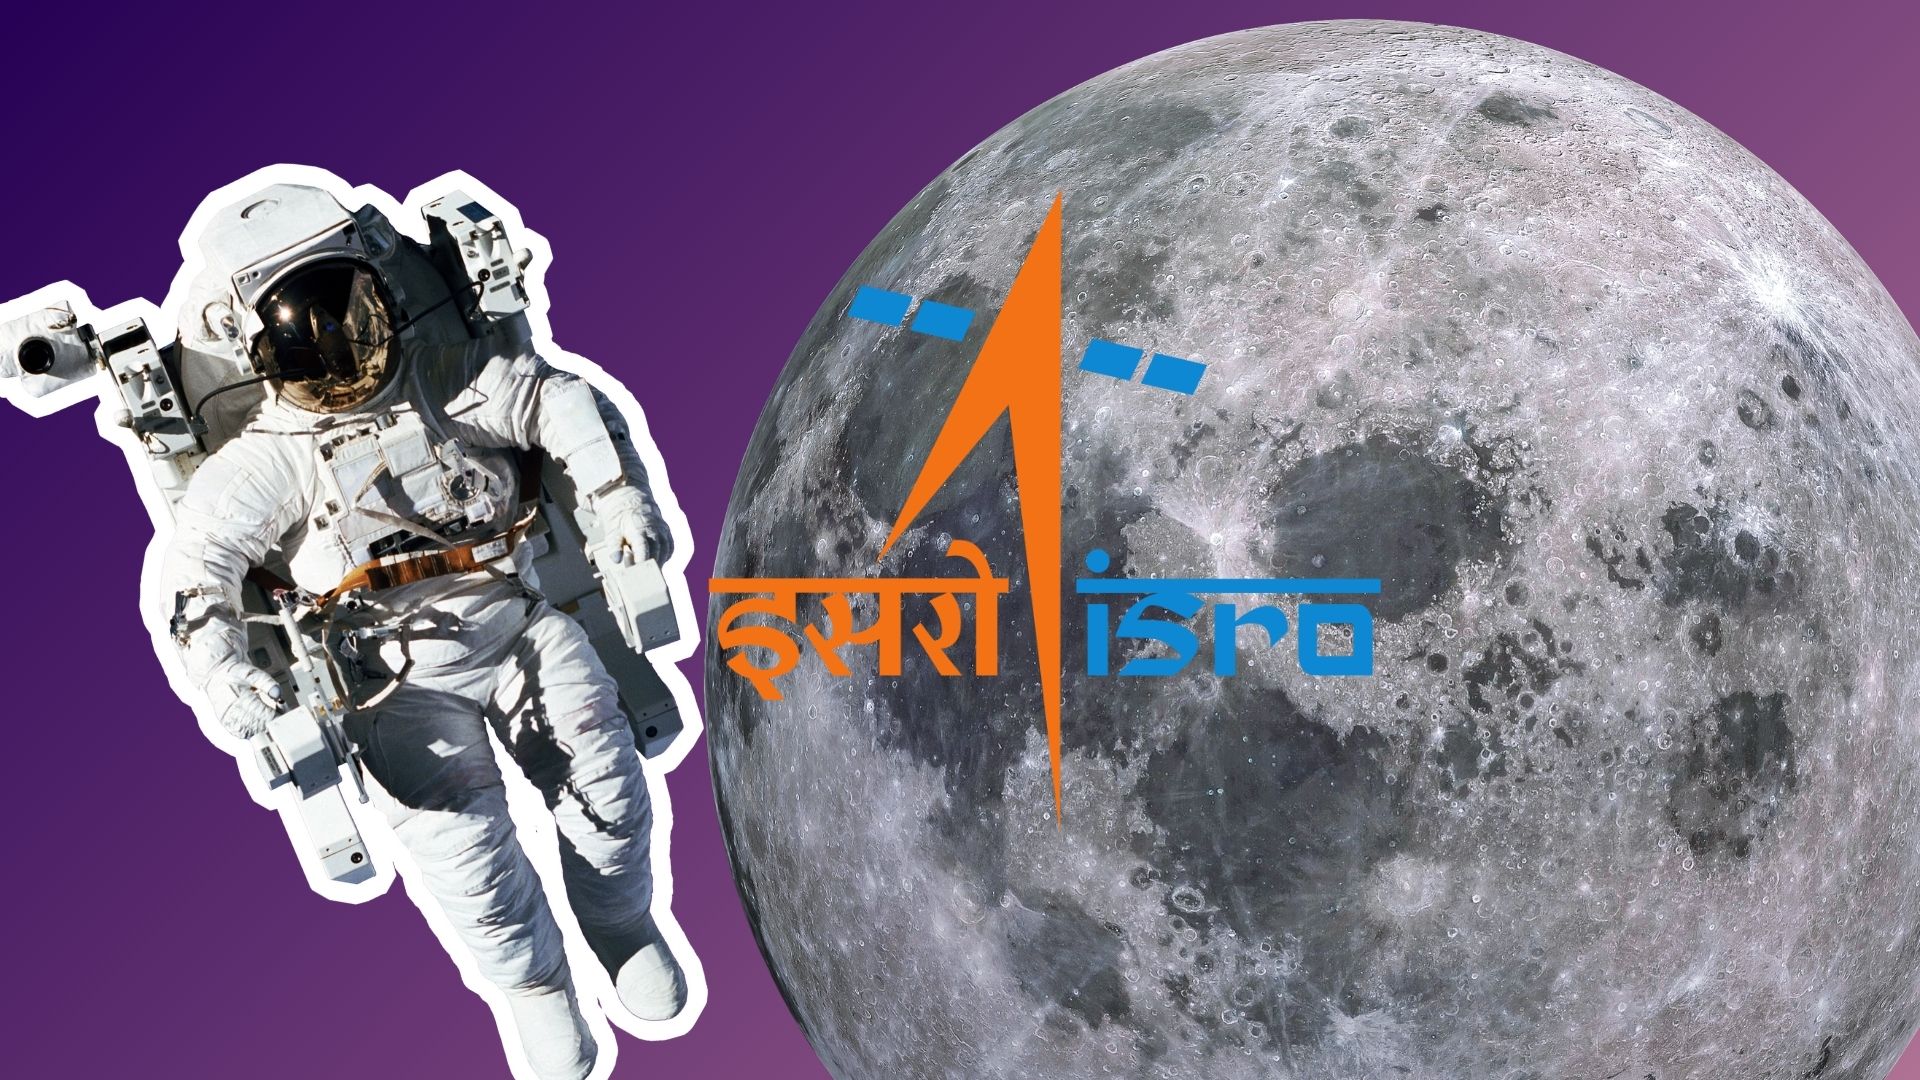 Gaganyaan Mission: India sees space station by 2035 and human on the Moon by 2040